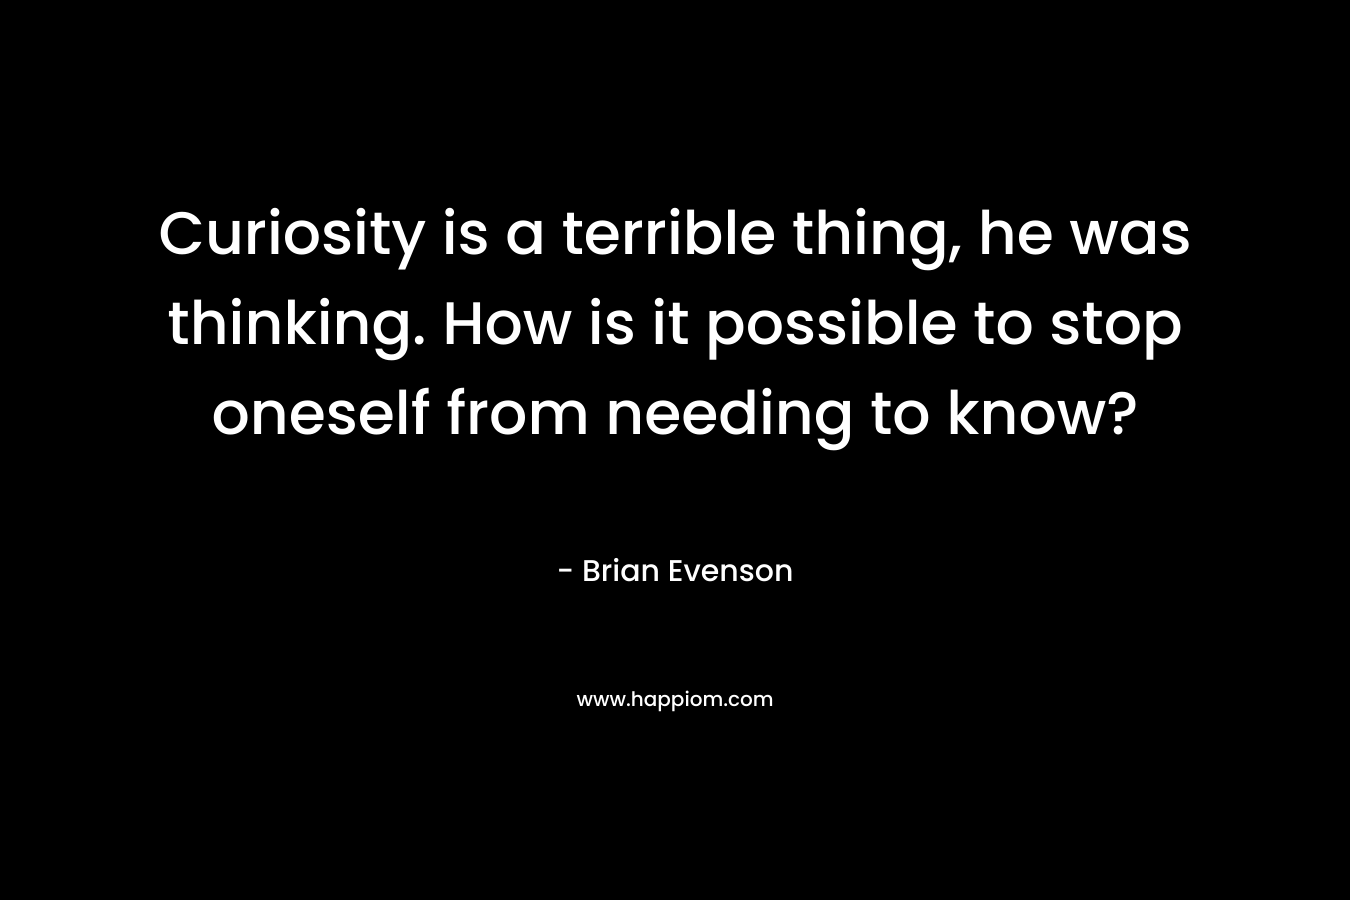 Curiosity is a terrible thing, he was thinking. How is it possible to stop oneself from needing to know?